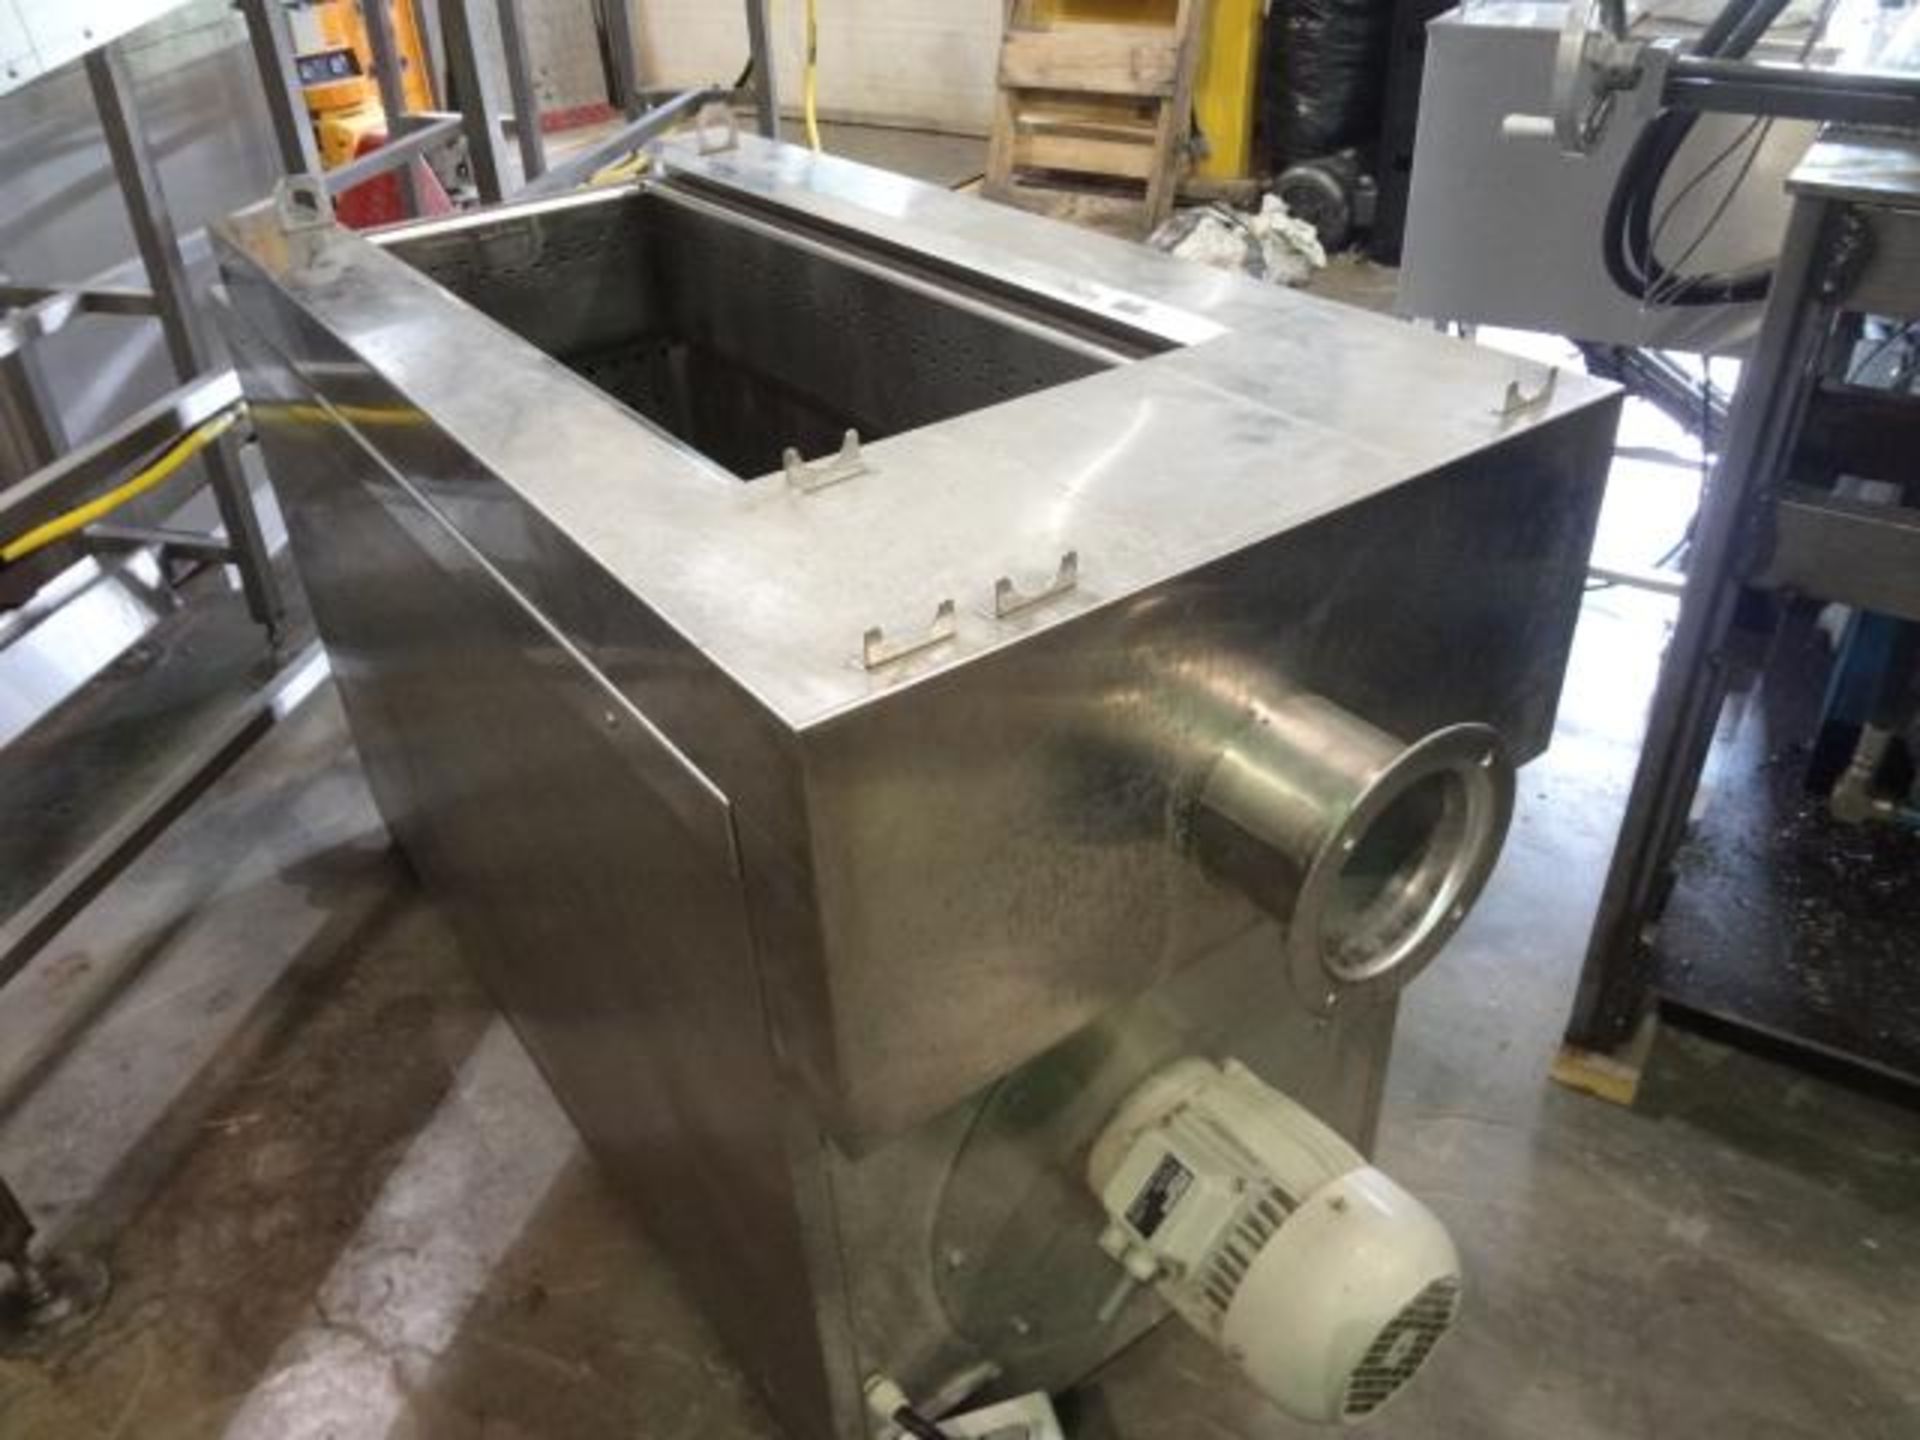 Bassin de trempage - Stainless tub